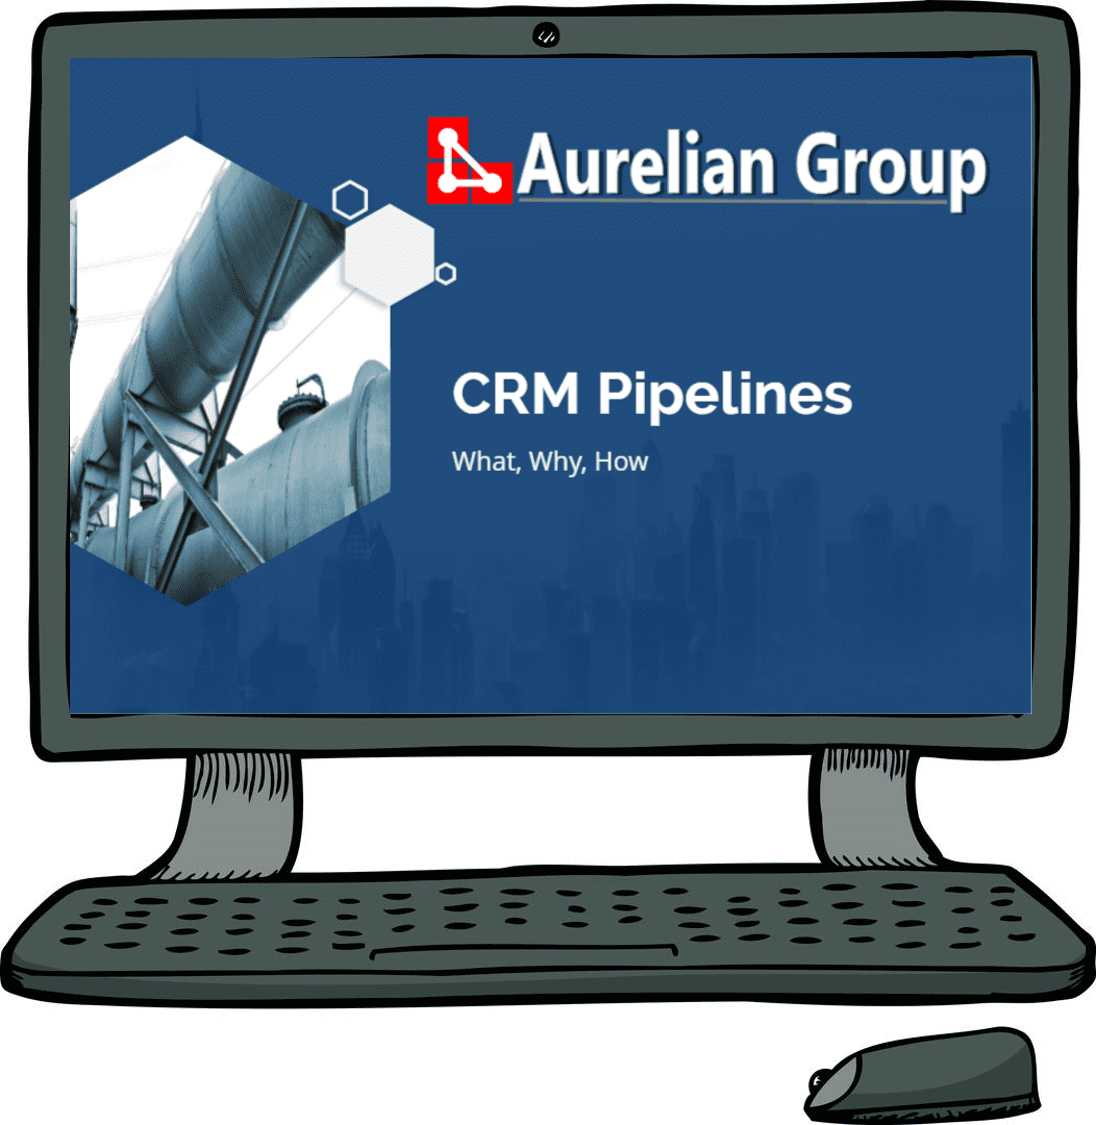 Configuring your Sales Pipeline in CRM